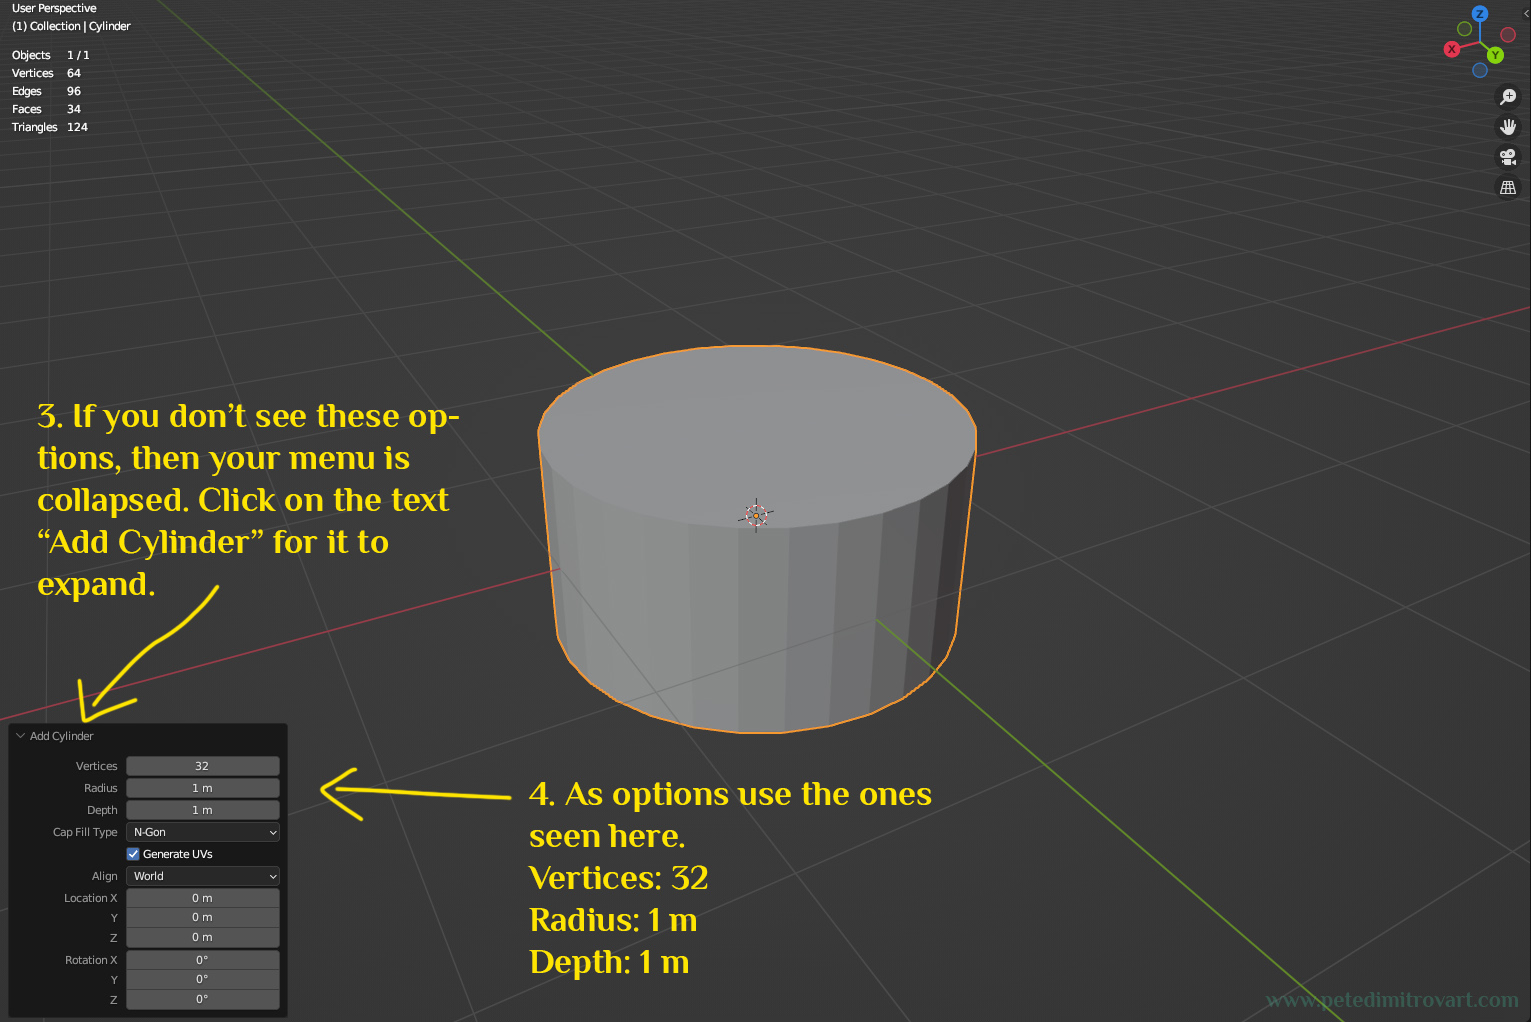 Blender screenshot. Shows the scene with an added cylinder. Text in image reads: “3. If you don’t see these options, then your menu is collapsed. Click on the text “Add Cylinder” for it to expand. 4. As options use the ones seen here: vertices 32, radius 1 meter, depth 1 meter.”